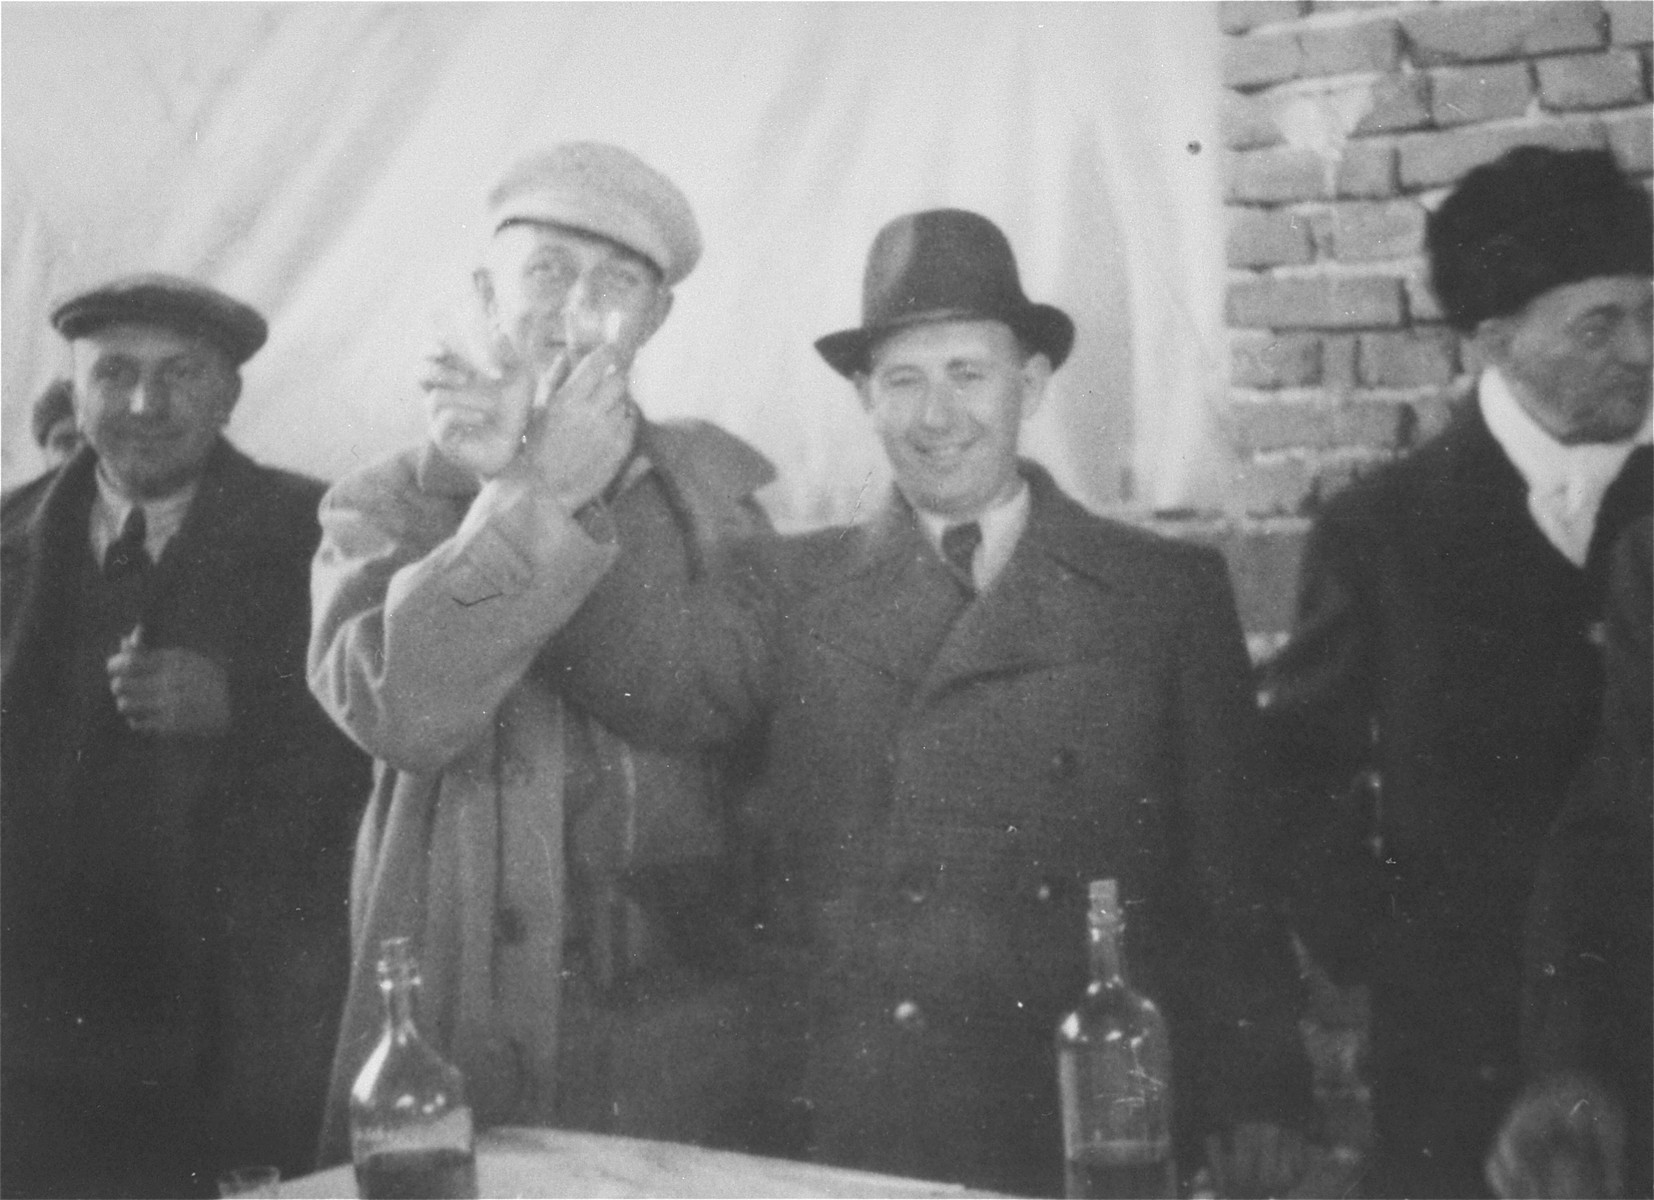 A group of men toast the opening of a new wood manufacturing factory in Gugesti, Romania.

Among those pictured is Beno Kupferman (second from the right).